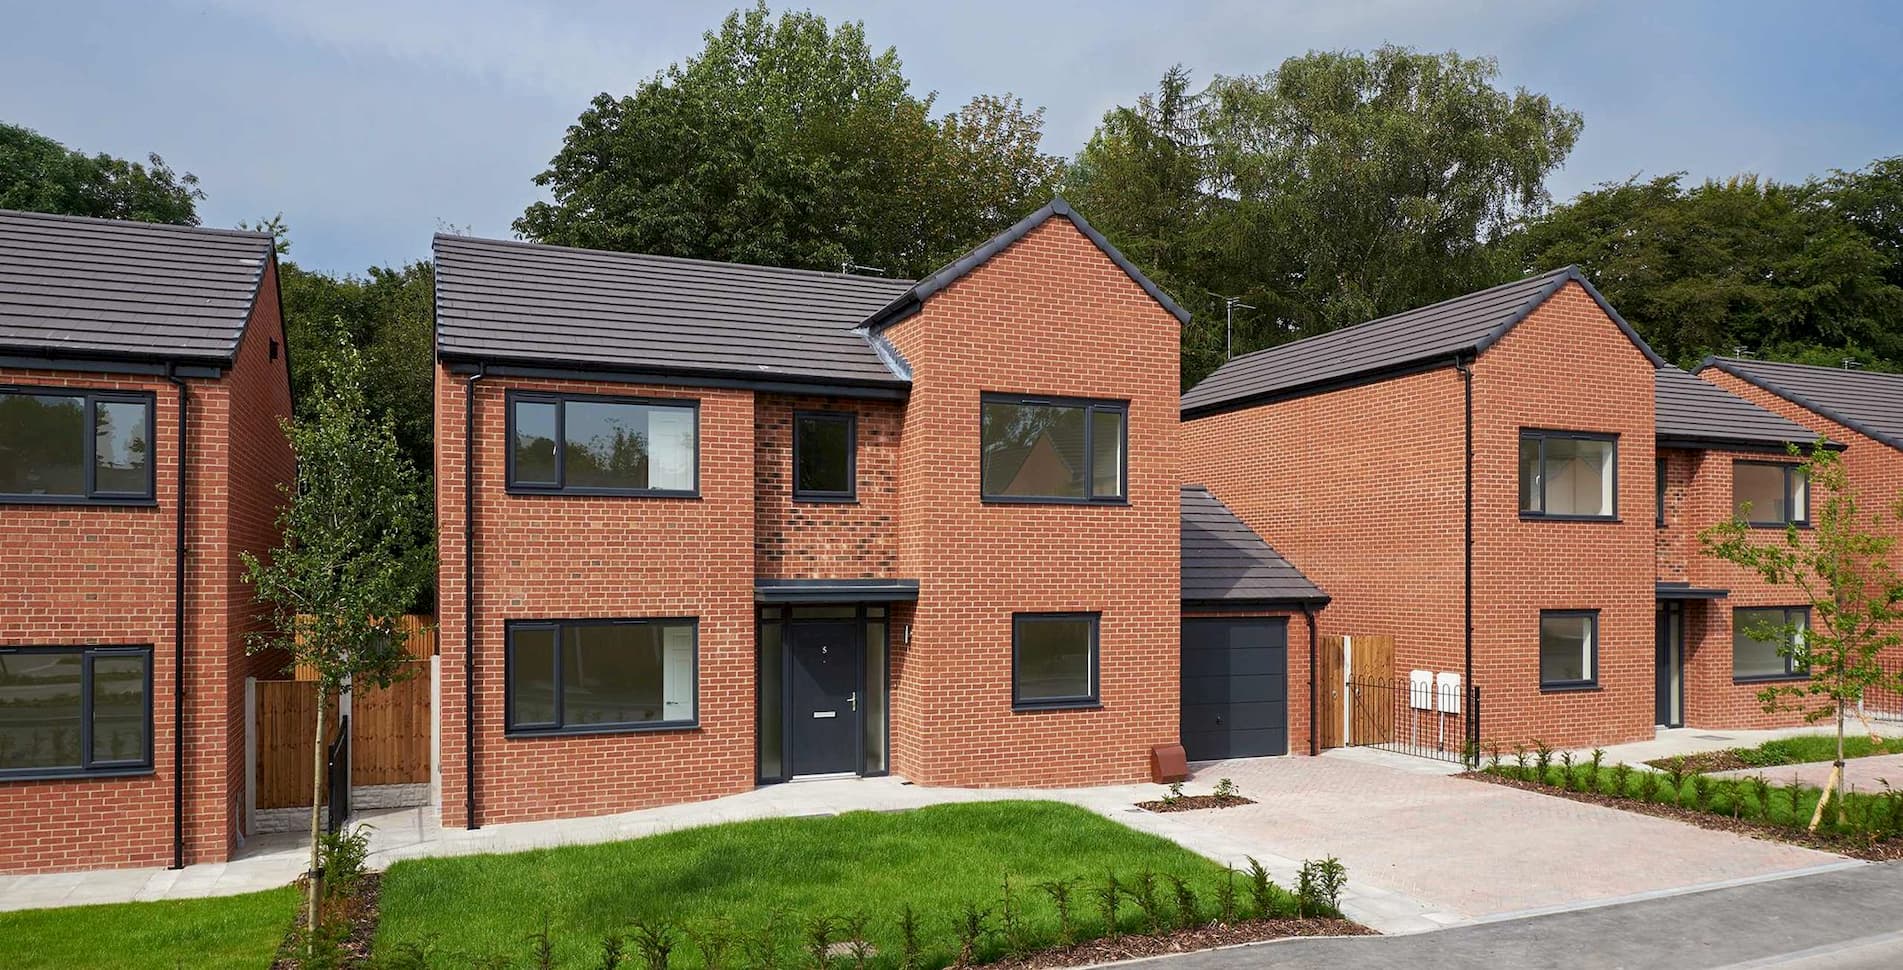 New Homes Development in Pembroke Green, Greater Manchester by Laurus Homes